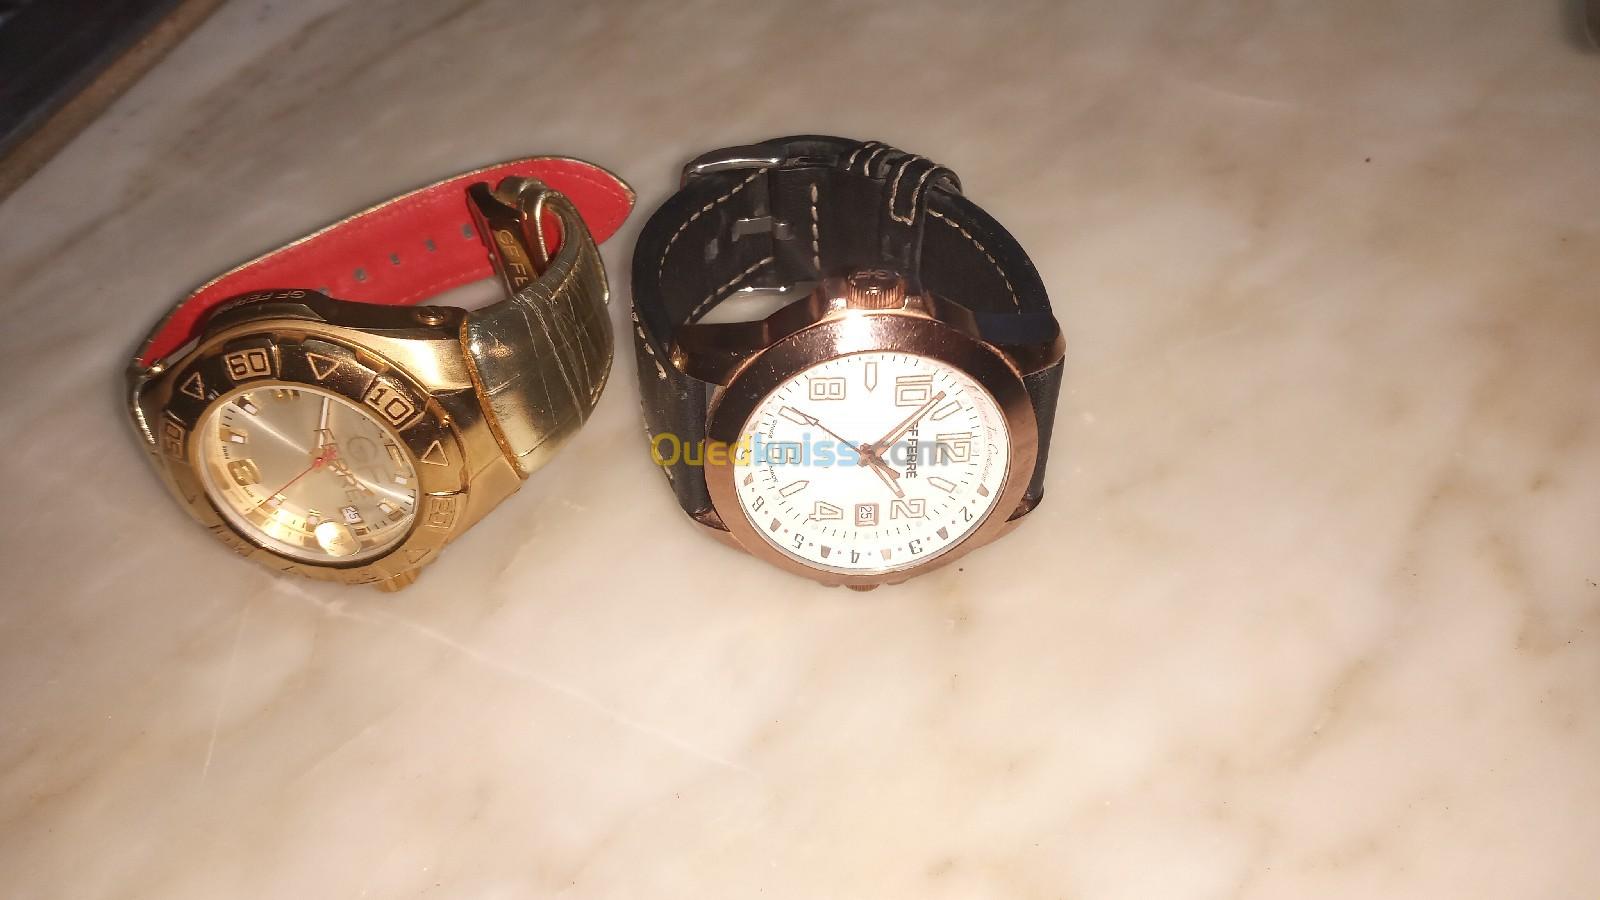  2 Montre original GIONFRACO PERRE HOMME ET FEMME BN OCCASIONS HAWDINE CABA